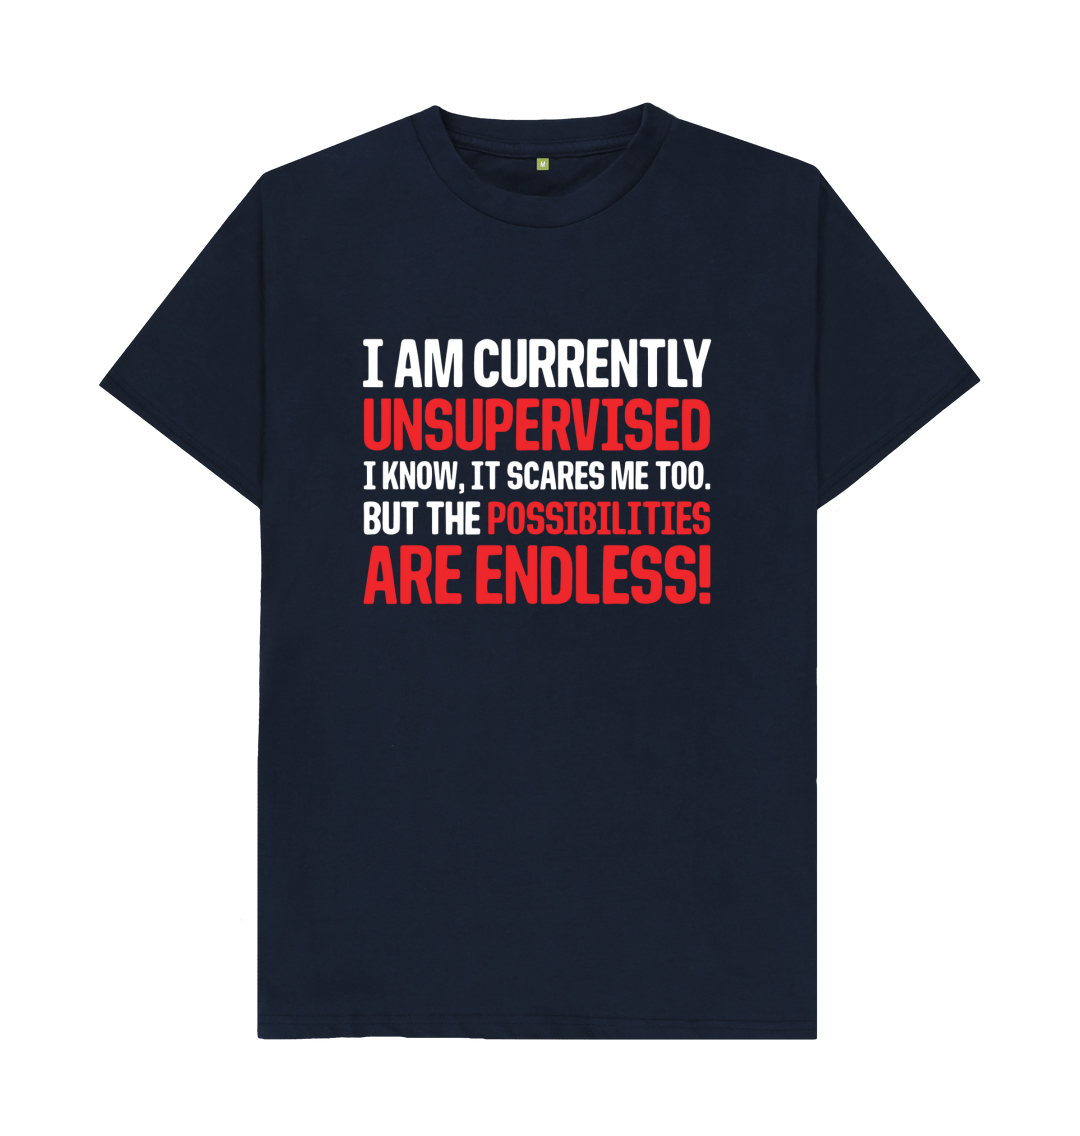 I'm Currently Unsupervised Endless Possibilities T Shirt